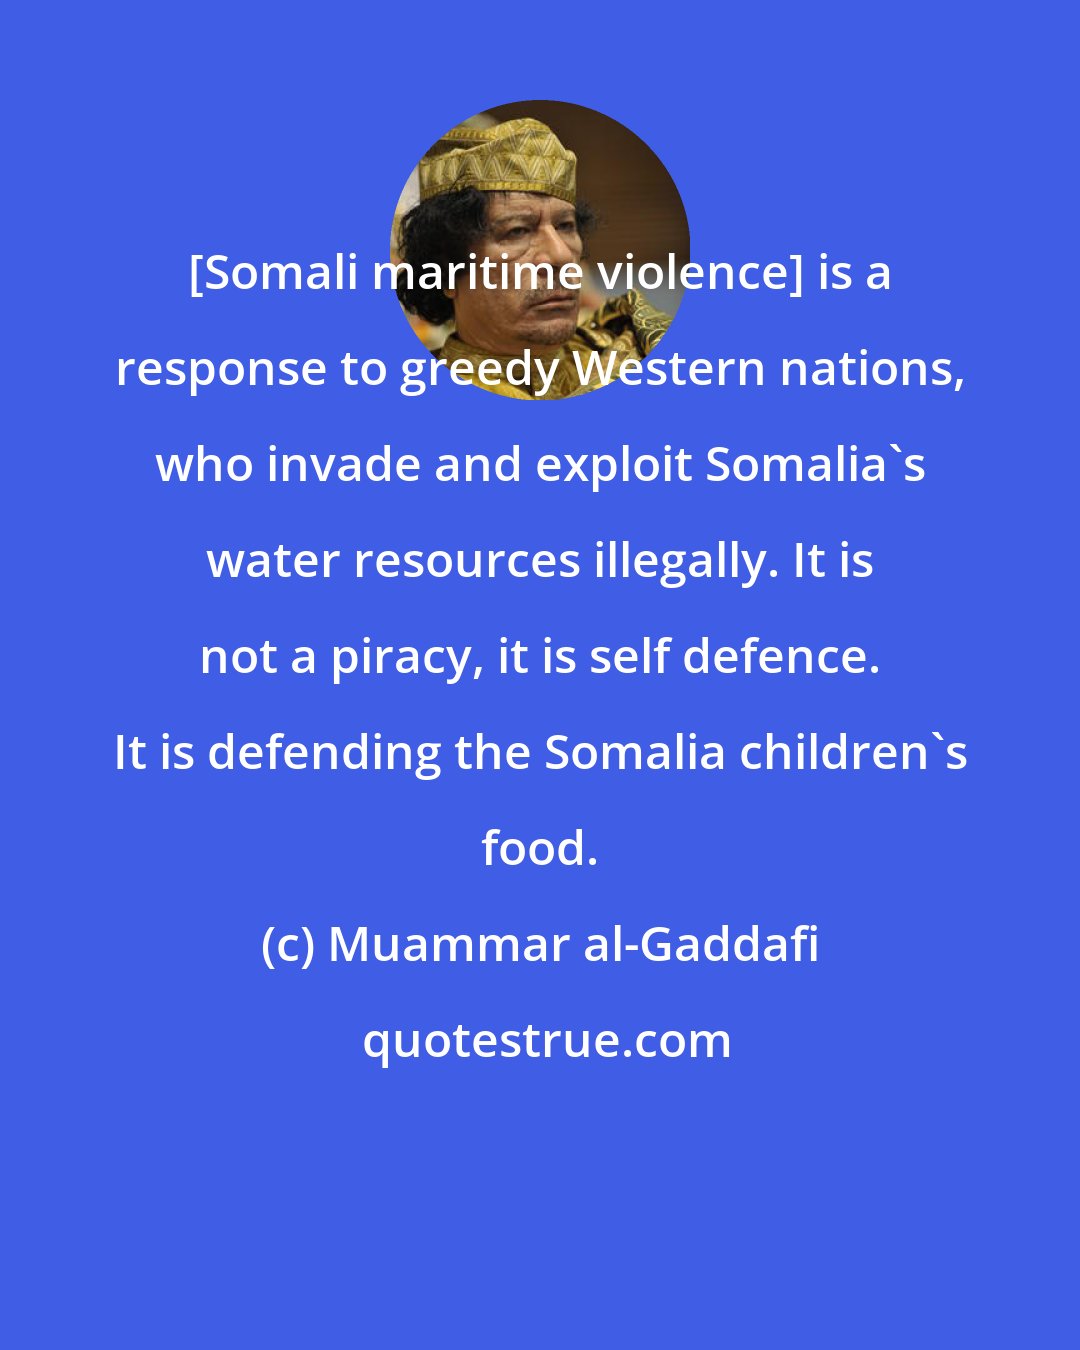 Muammar al-Gaddafi: [Somali maritime violence] is a response to greedy Western nations, who invade and exploit Somalia's water resources illegally. It is not a piracy, it is self defence. It is defending the Somalia children's food.